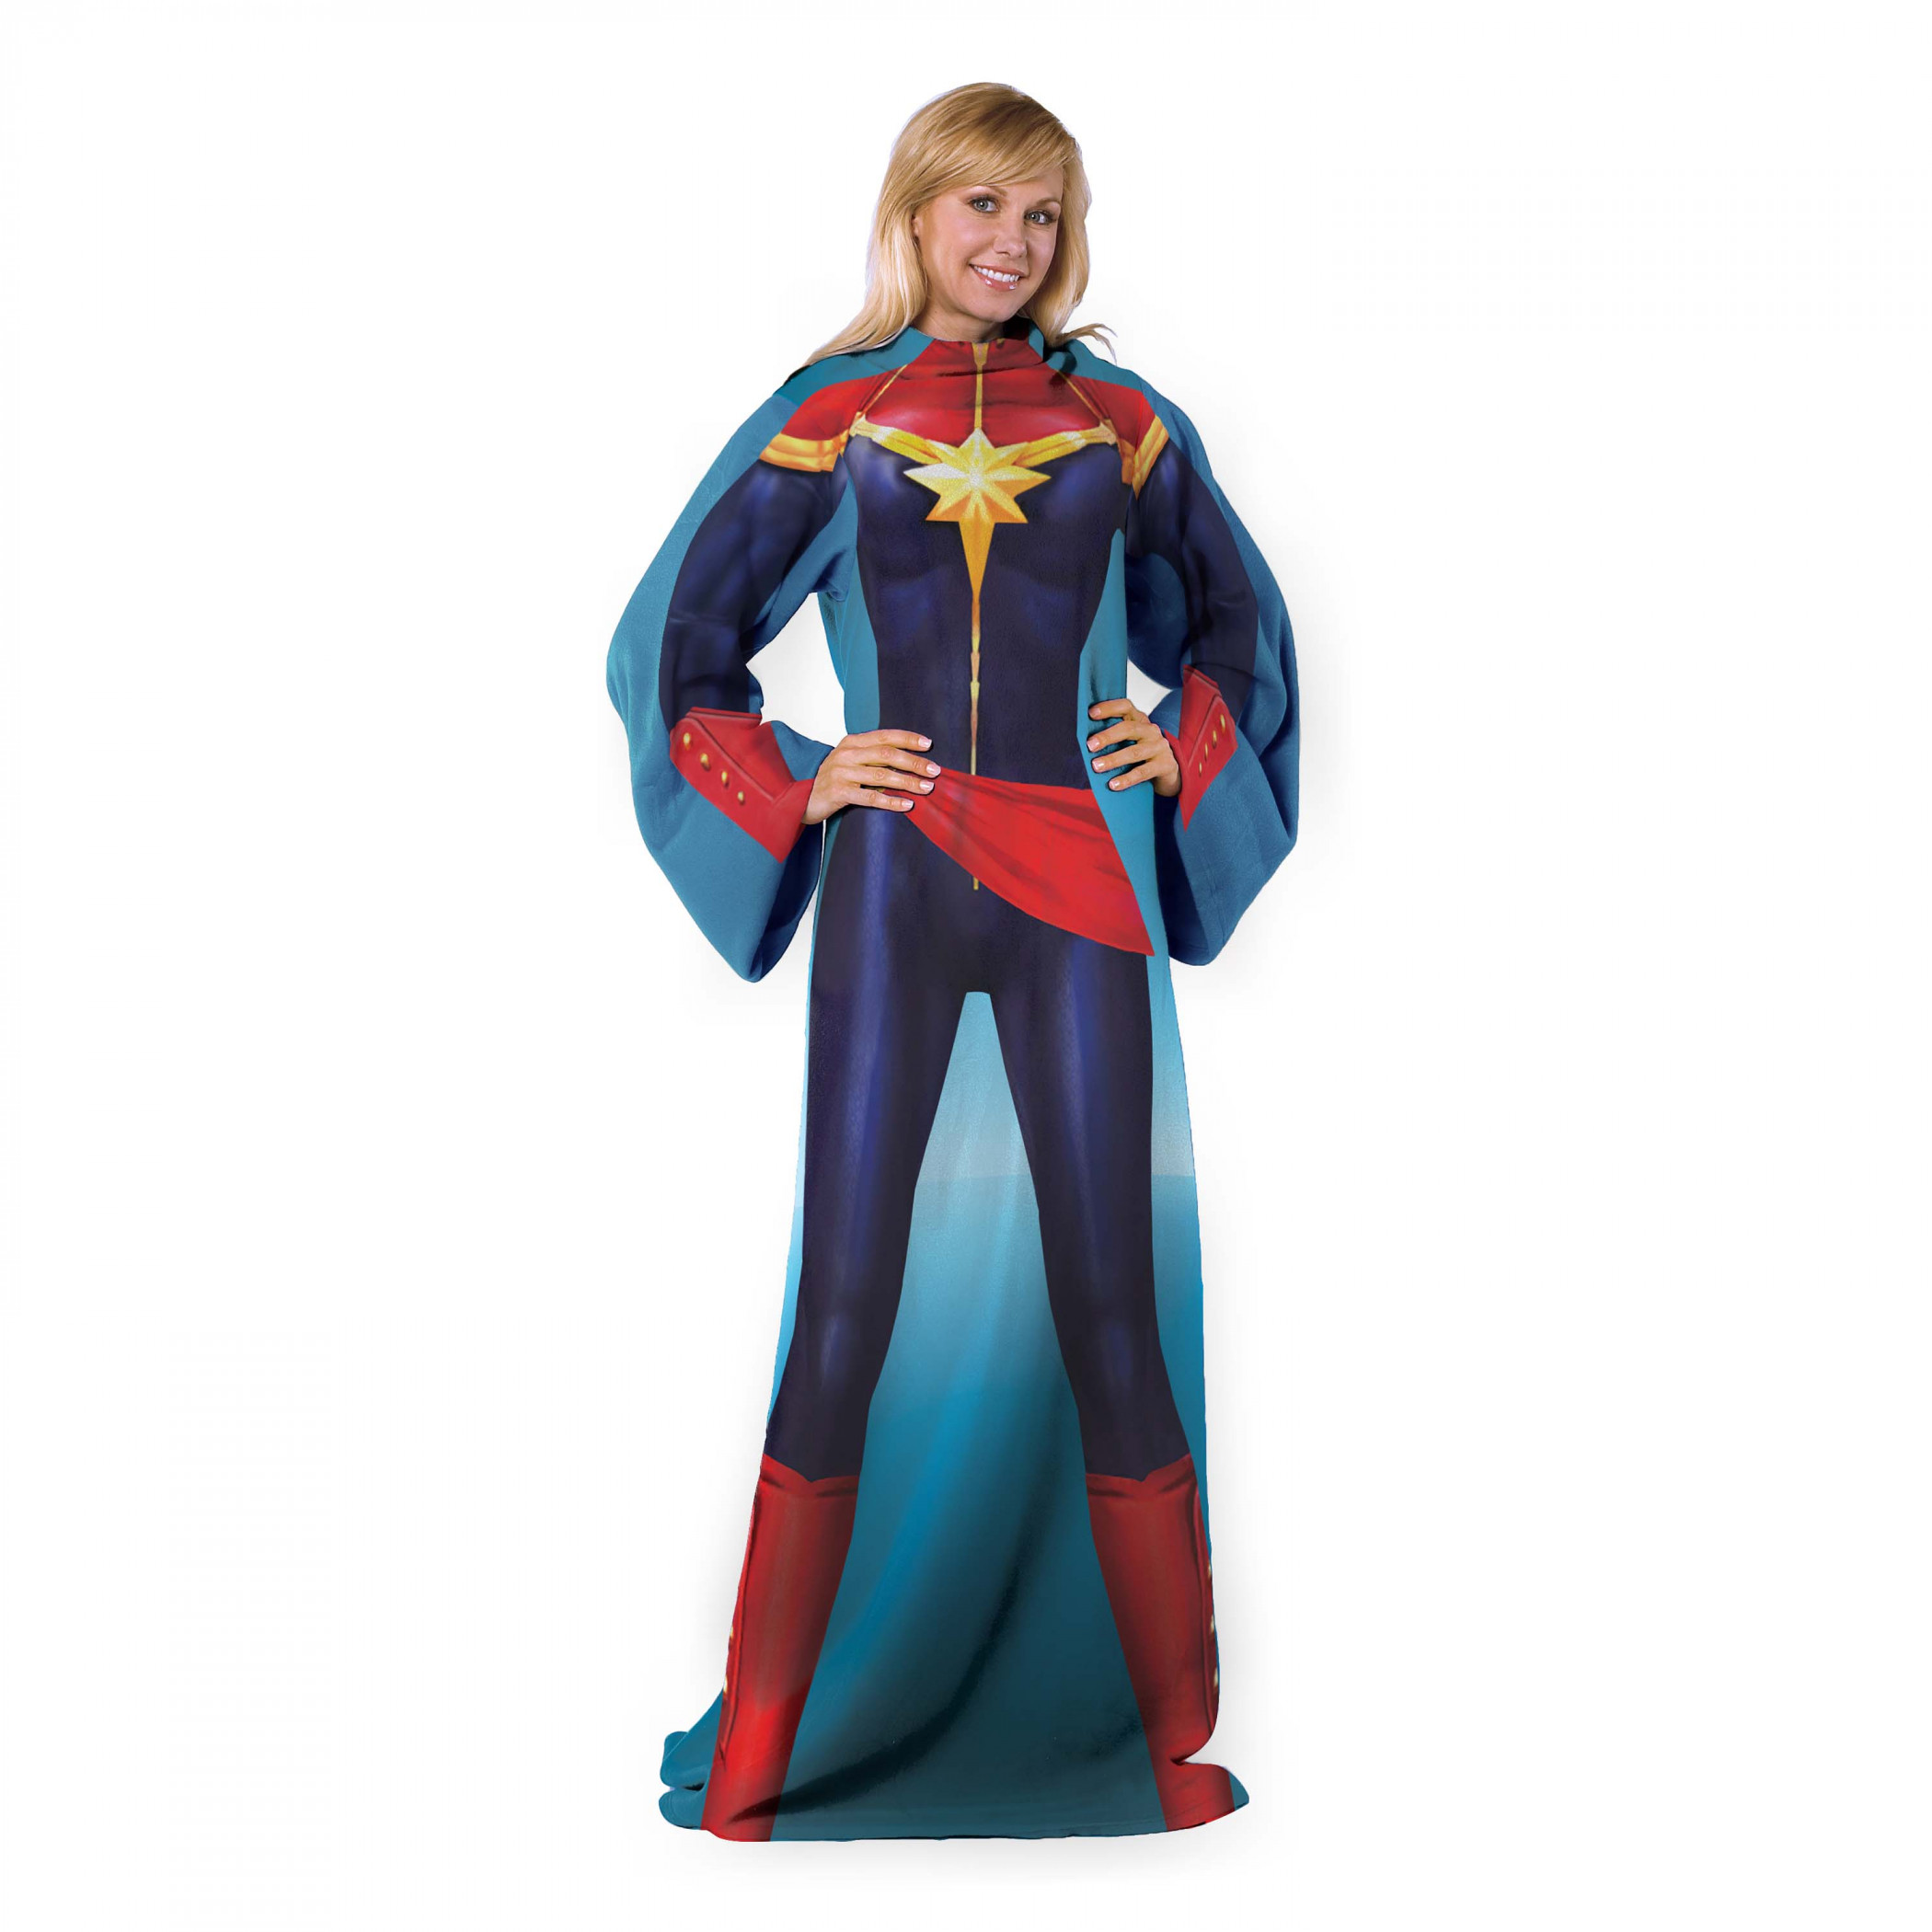 Captain Marvel Silk Touch Comfy Throw Blanket with Sleeves 48" x 71"